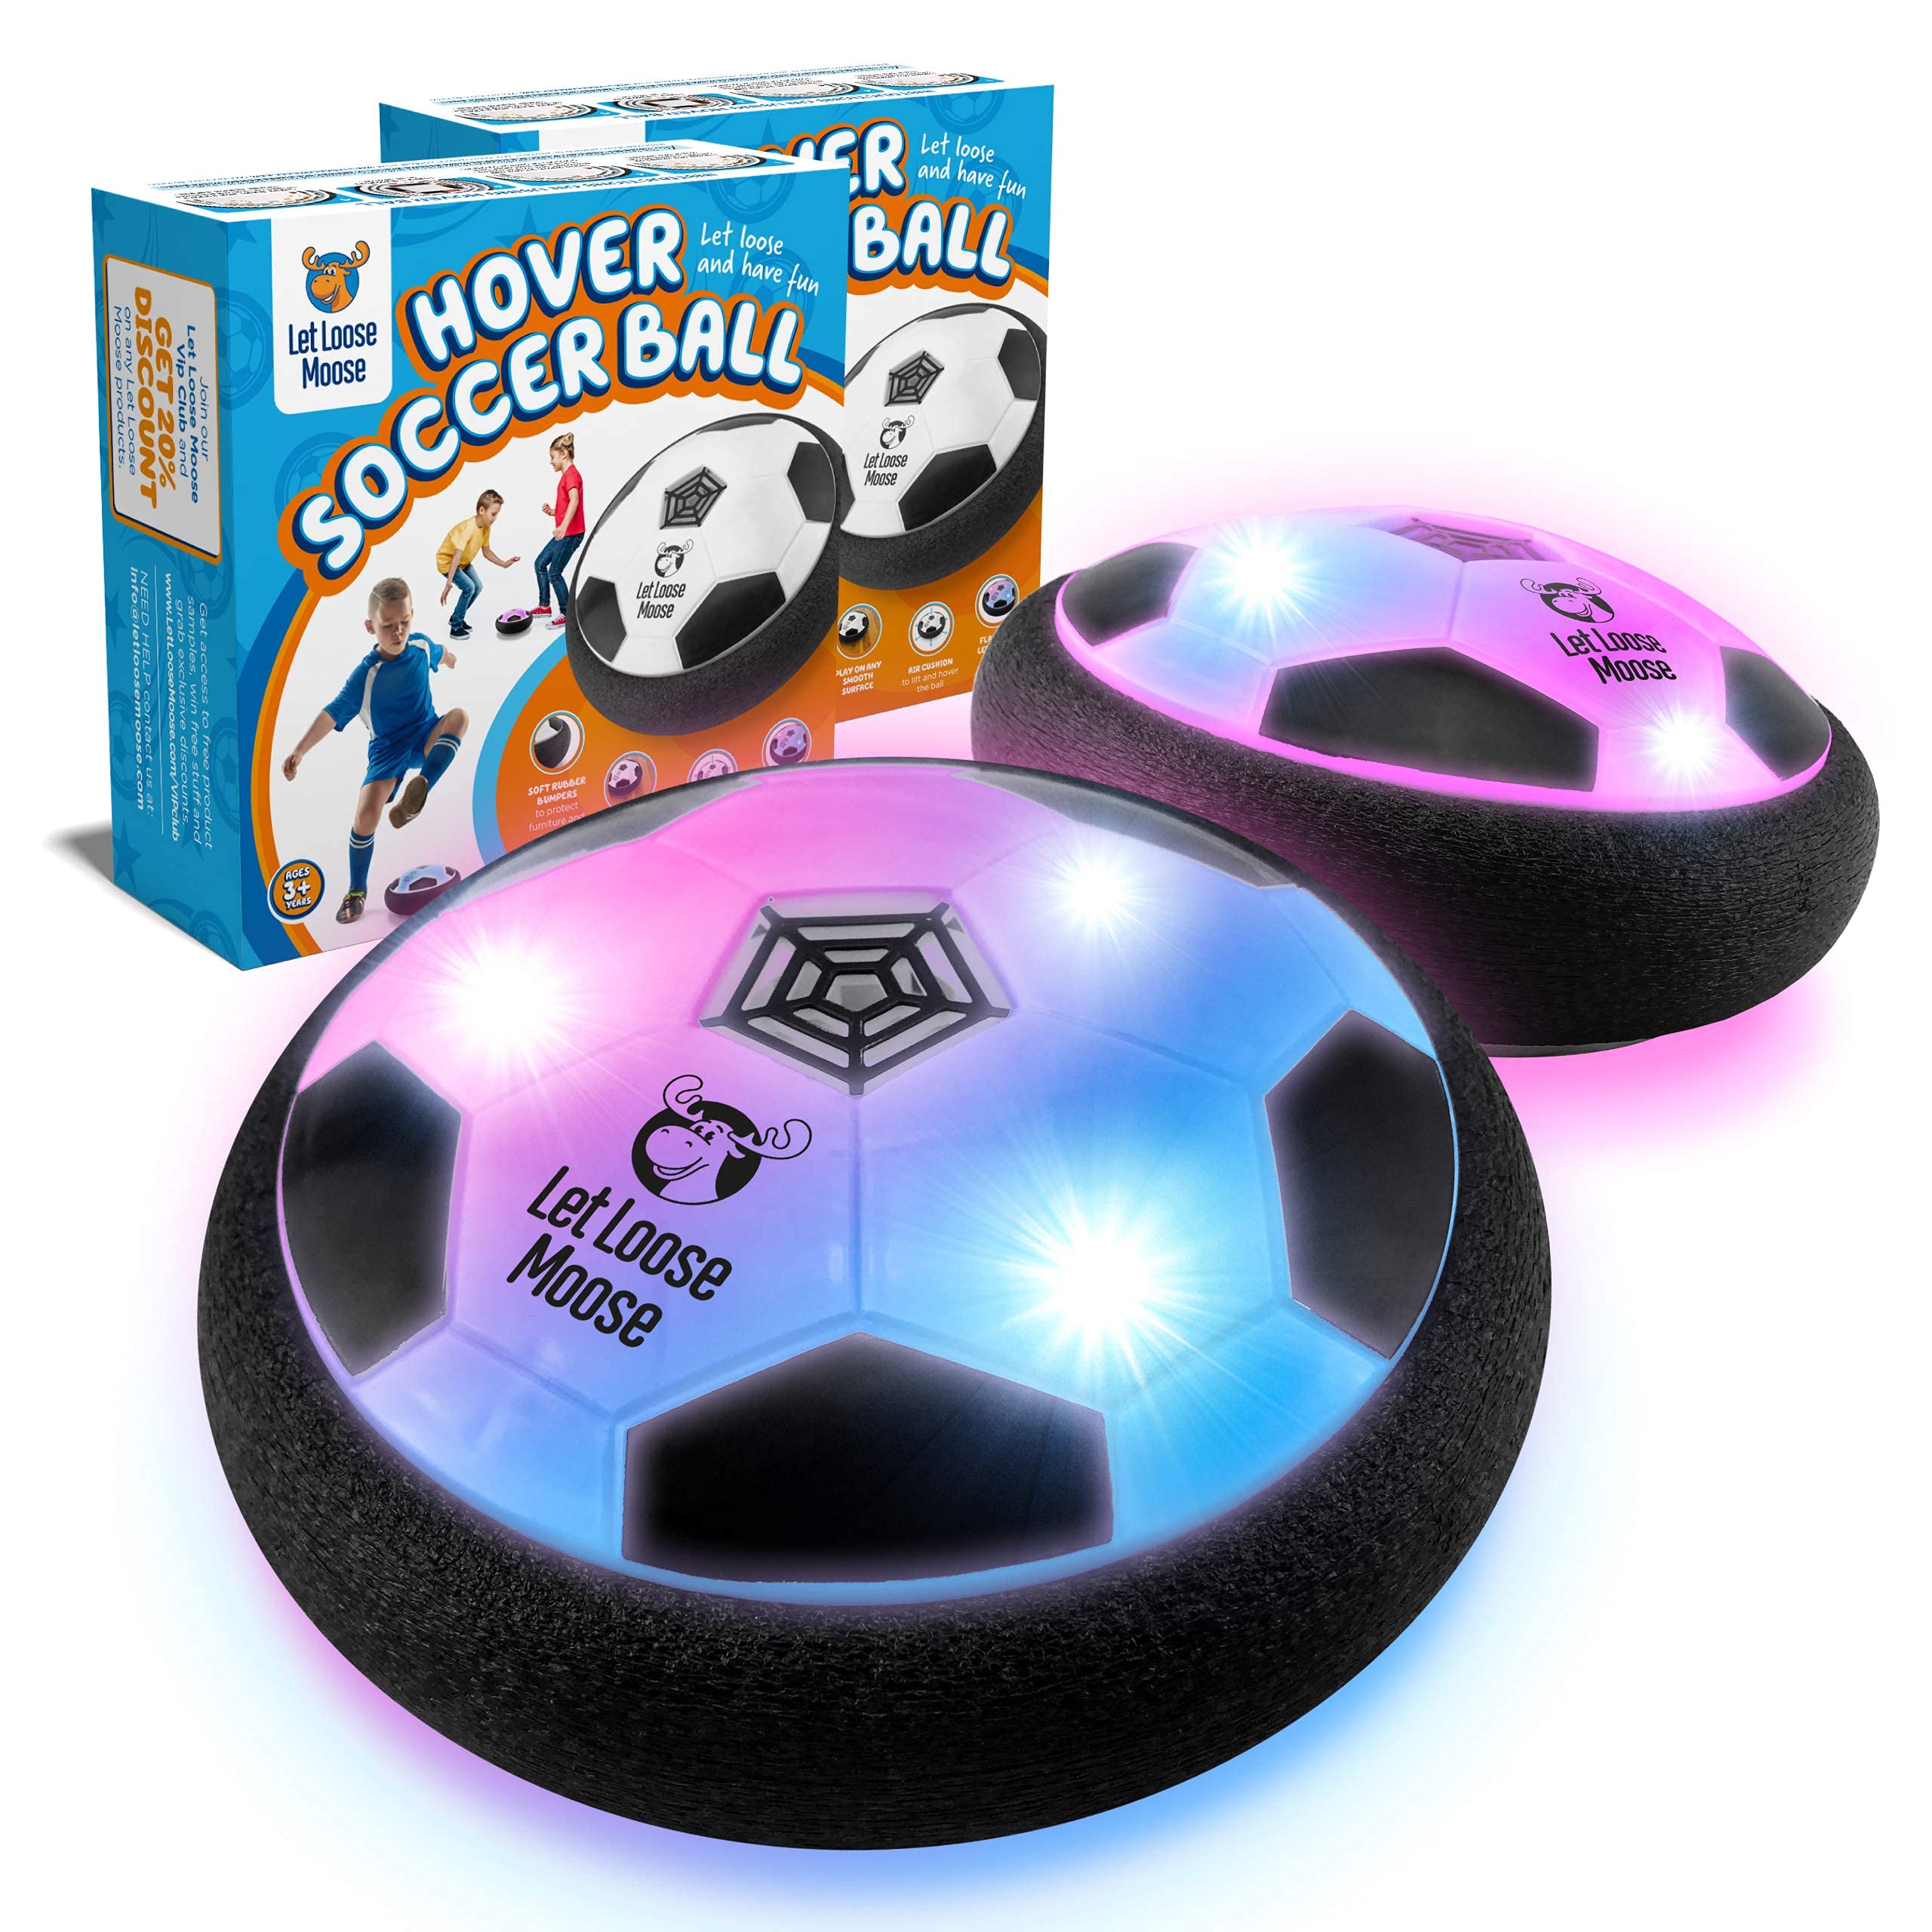 Hover Soccer Ball, Set of 2 Light Up LED Soccer Ball Toys, Safe For Indoor Play, Fun Toy For Boys and Girls, Great Gift for Kids, Birthday Gifts for Young Boys and Girls, Fun Soccer Training Equipment